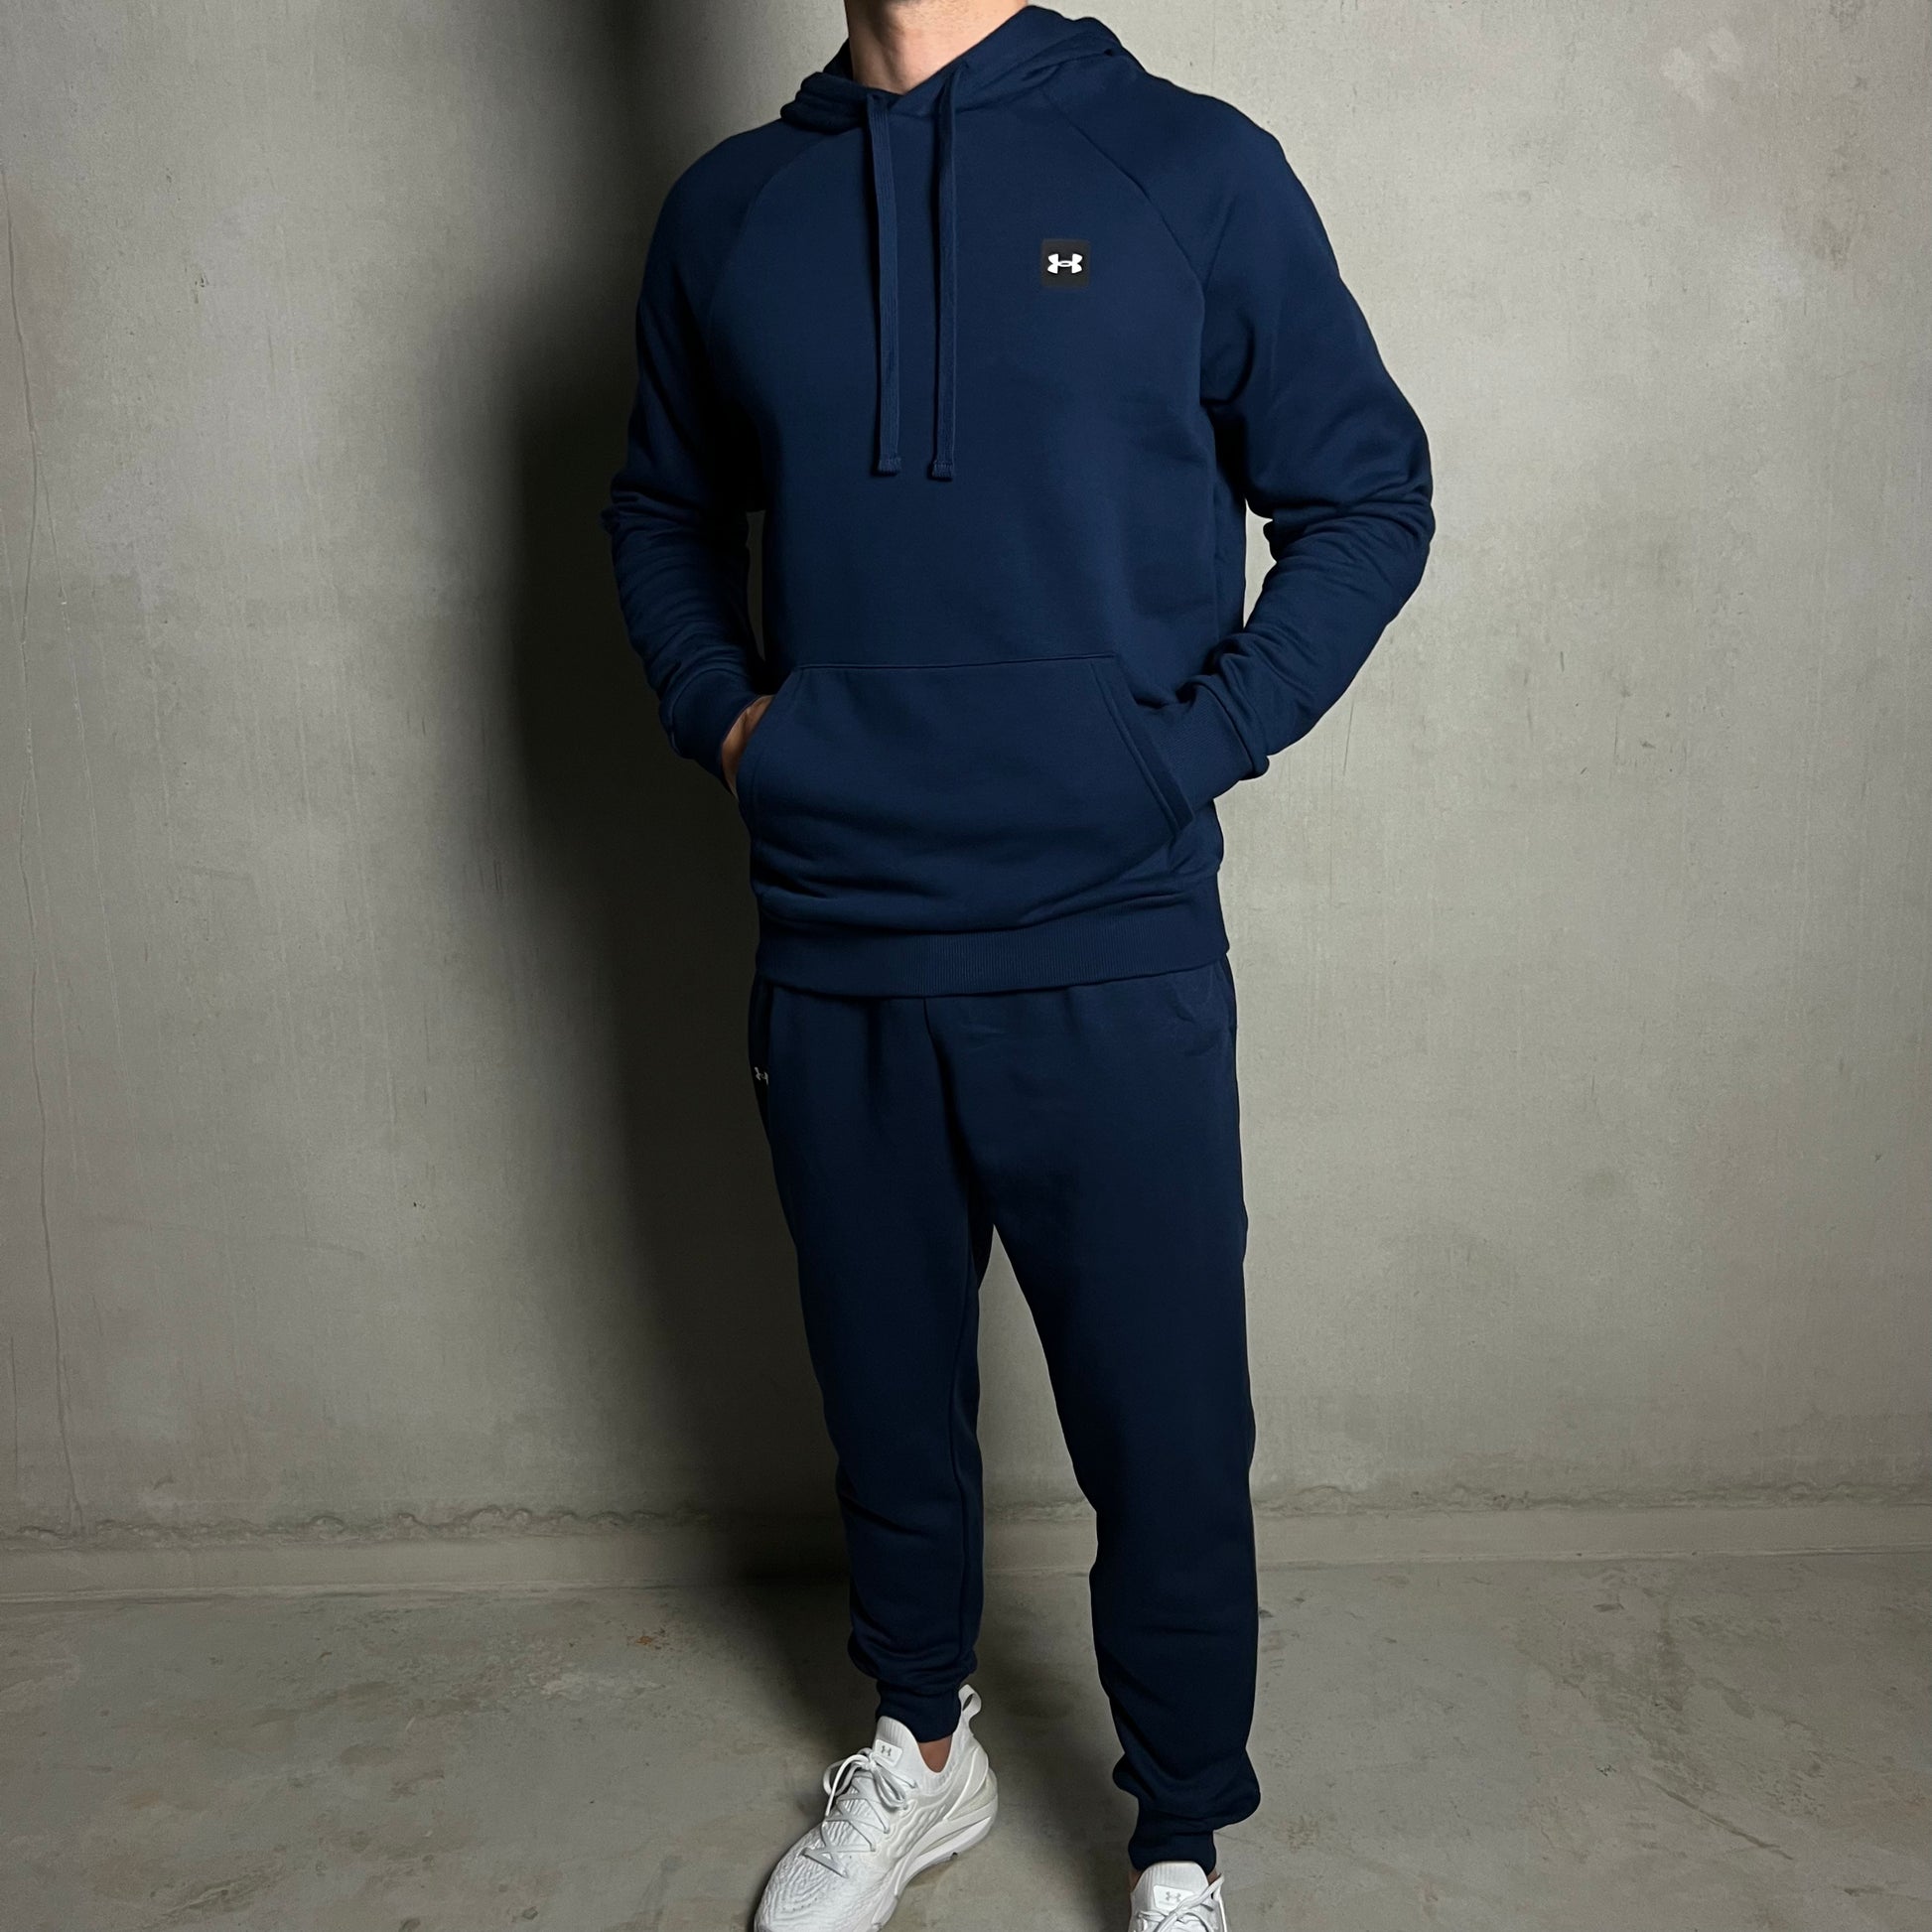 Hoodie Tracksuit 24motions – Blue Armour Under Fleece